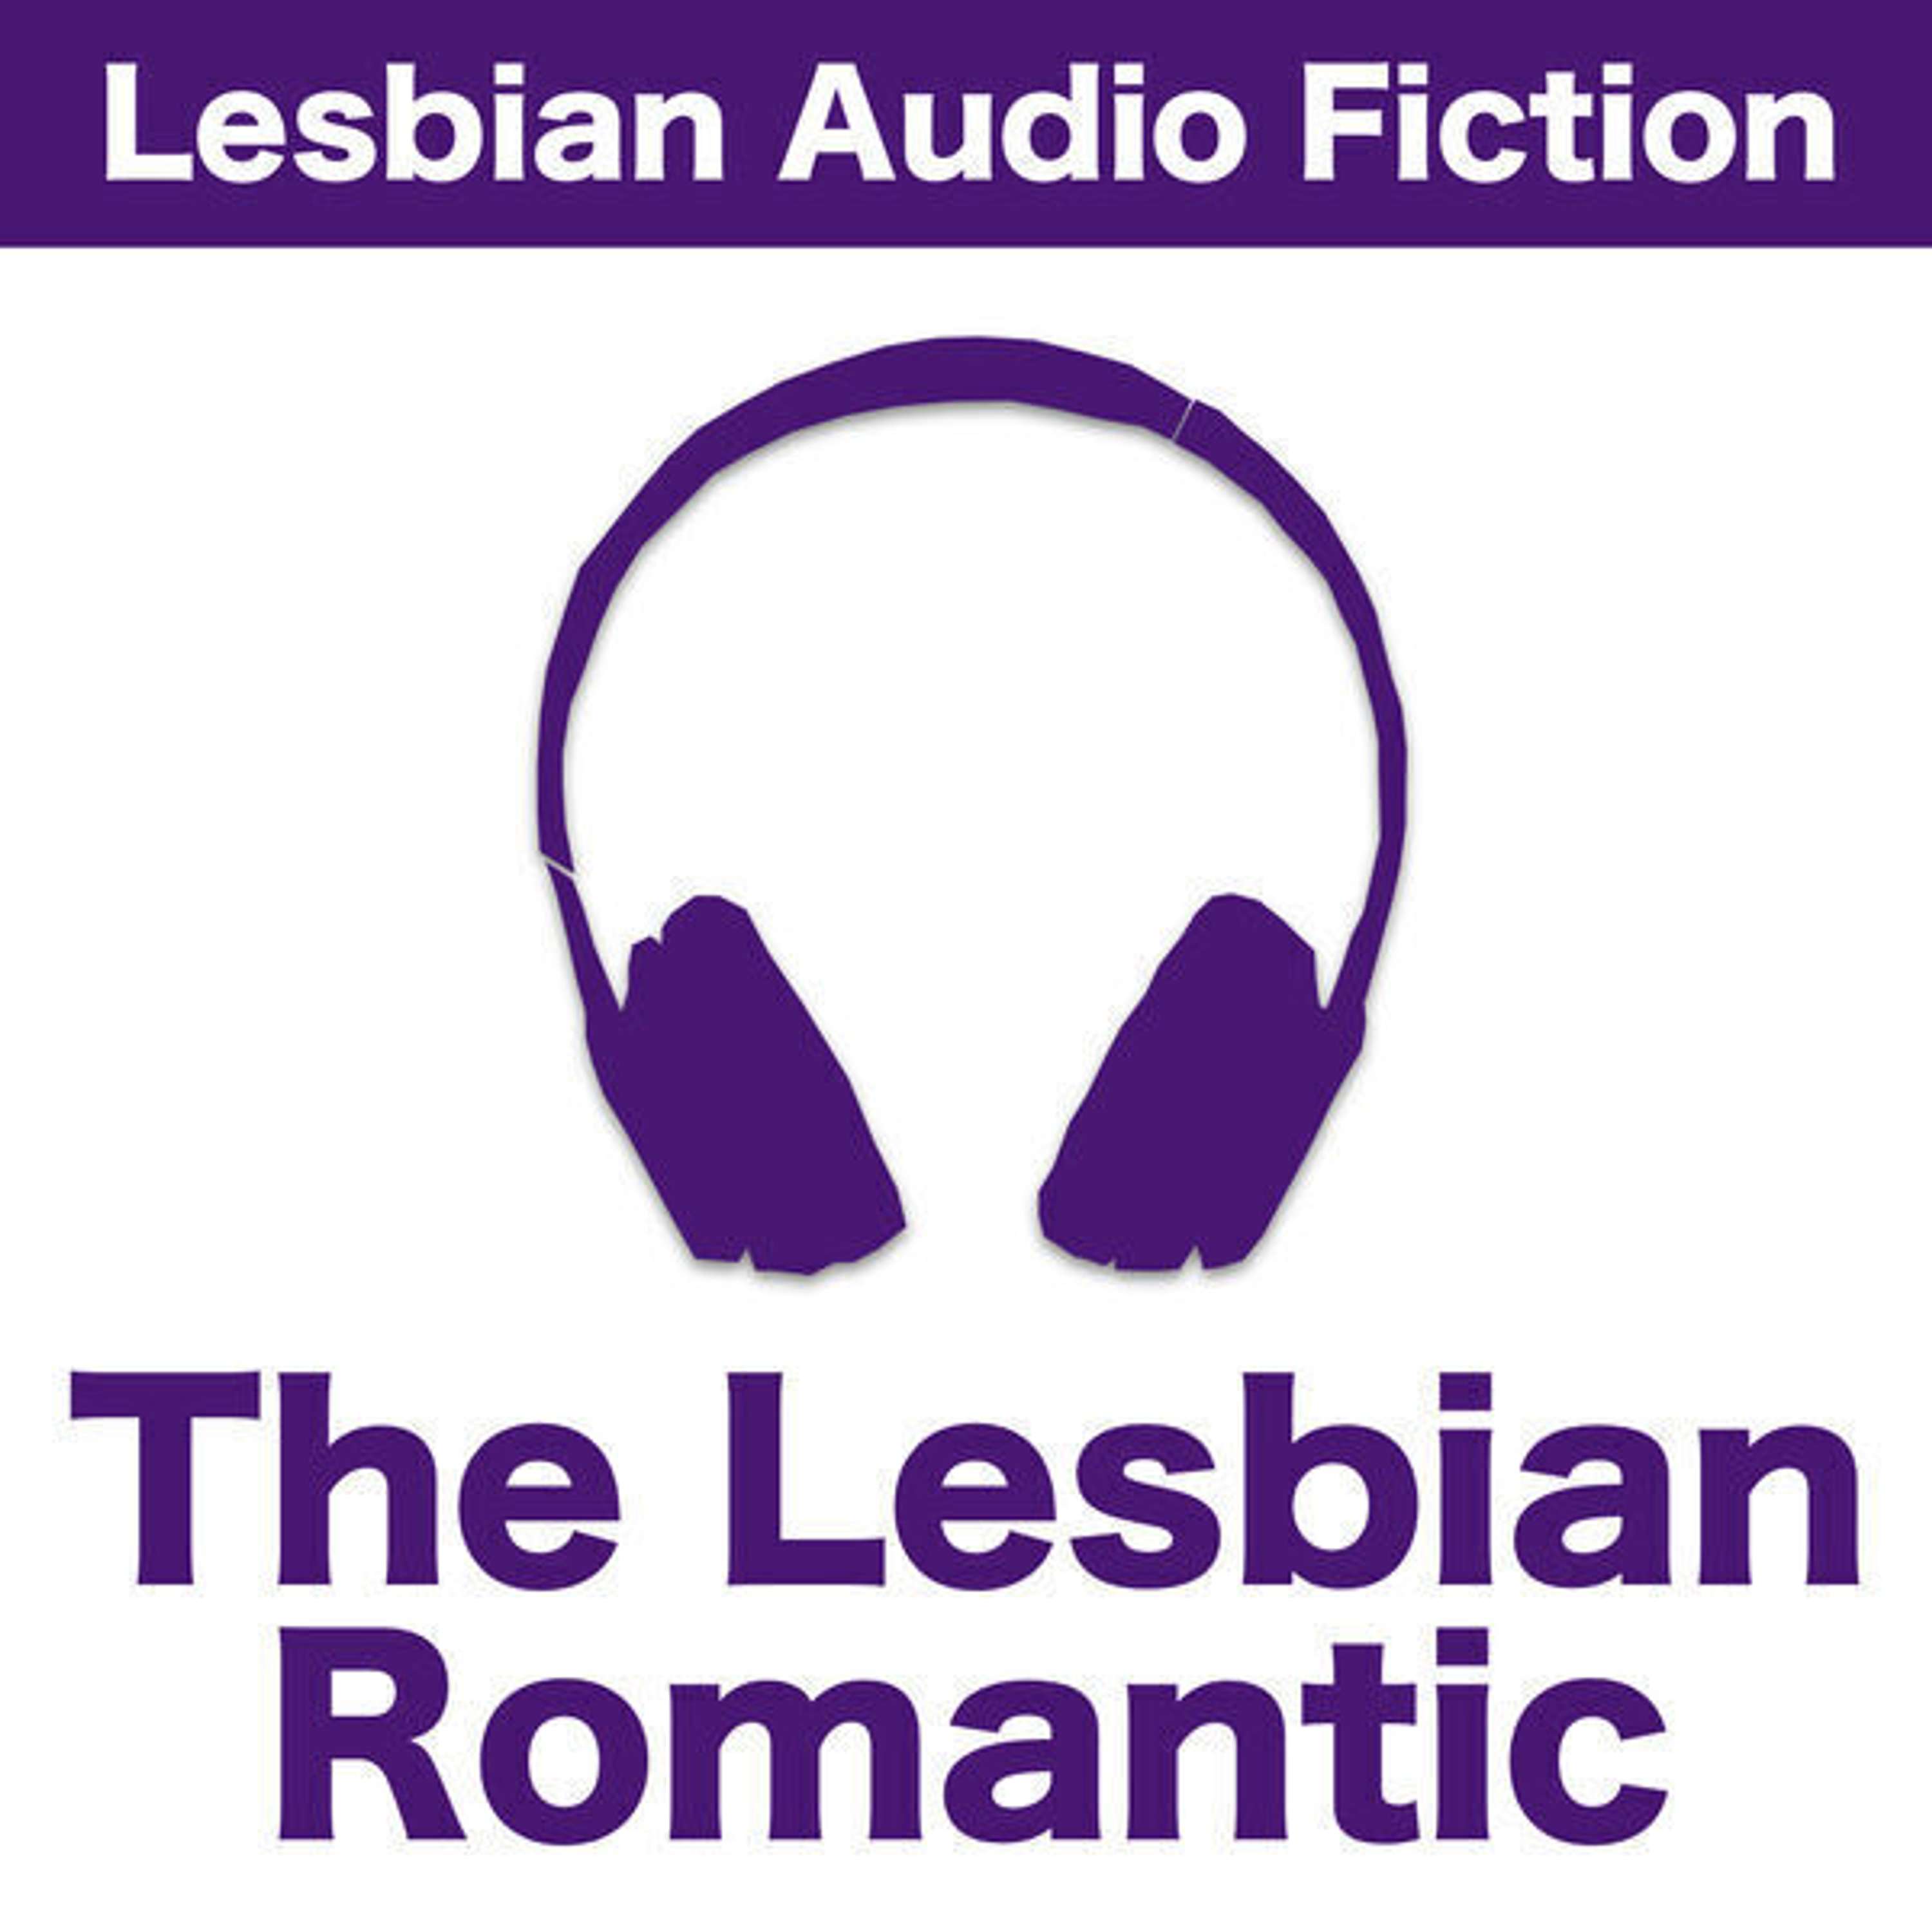 Part 07 of The Diva Story - a lesbian fiction audio drama (#59)